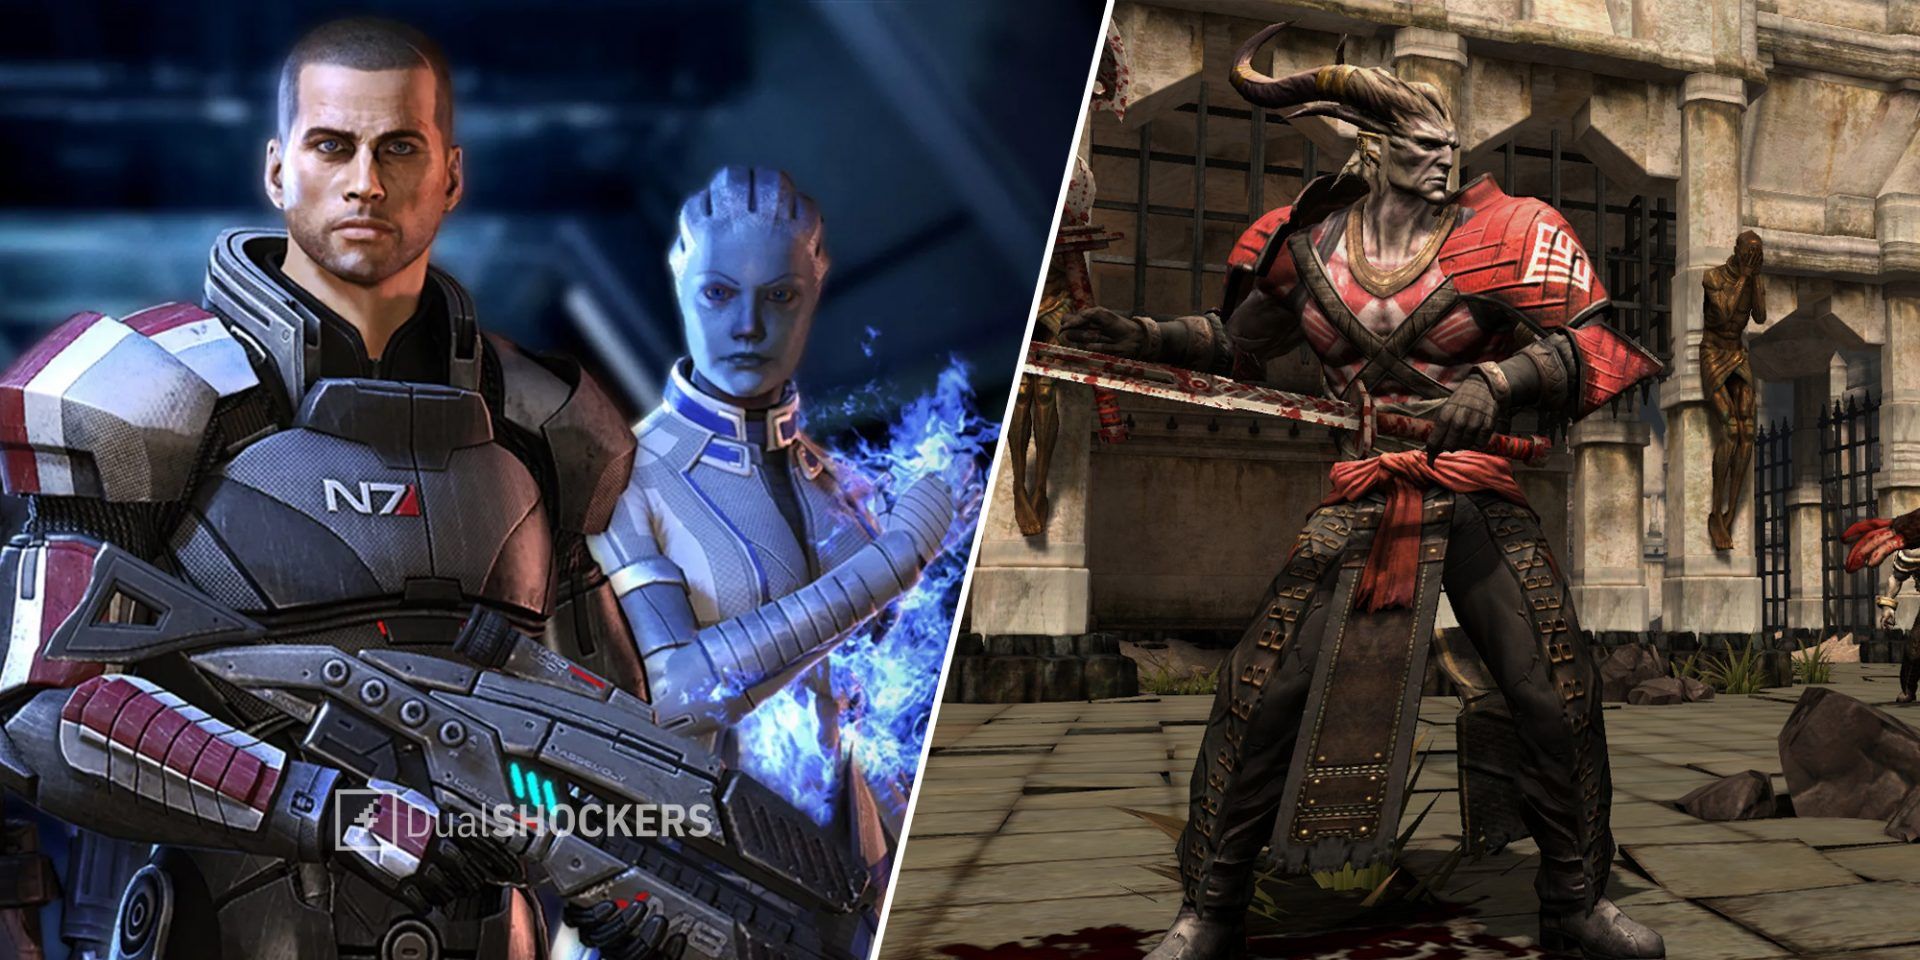 Mass Effect 3 on left, Dragon Age 2 on right